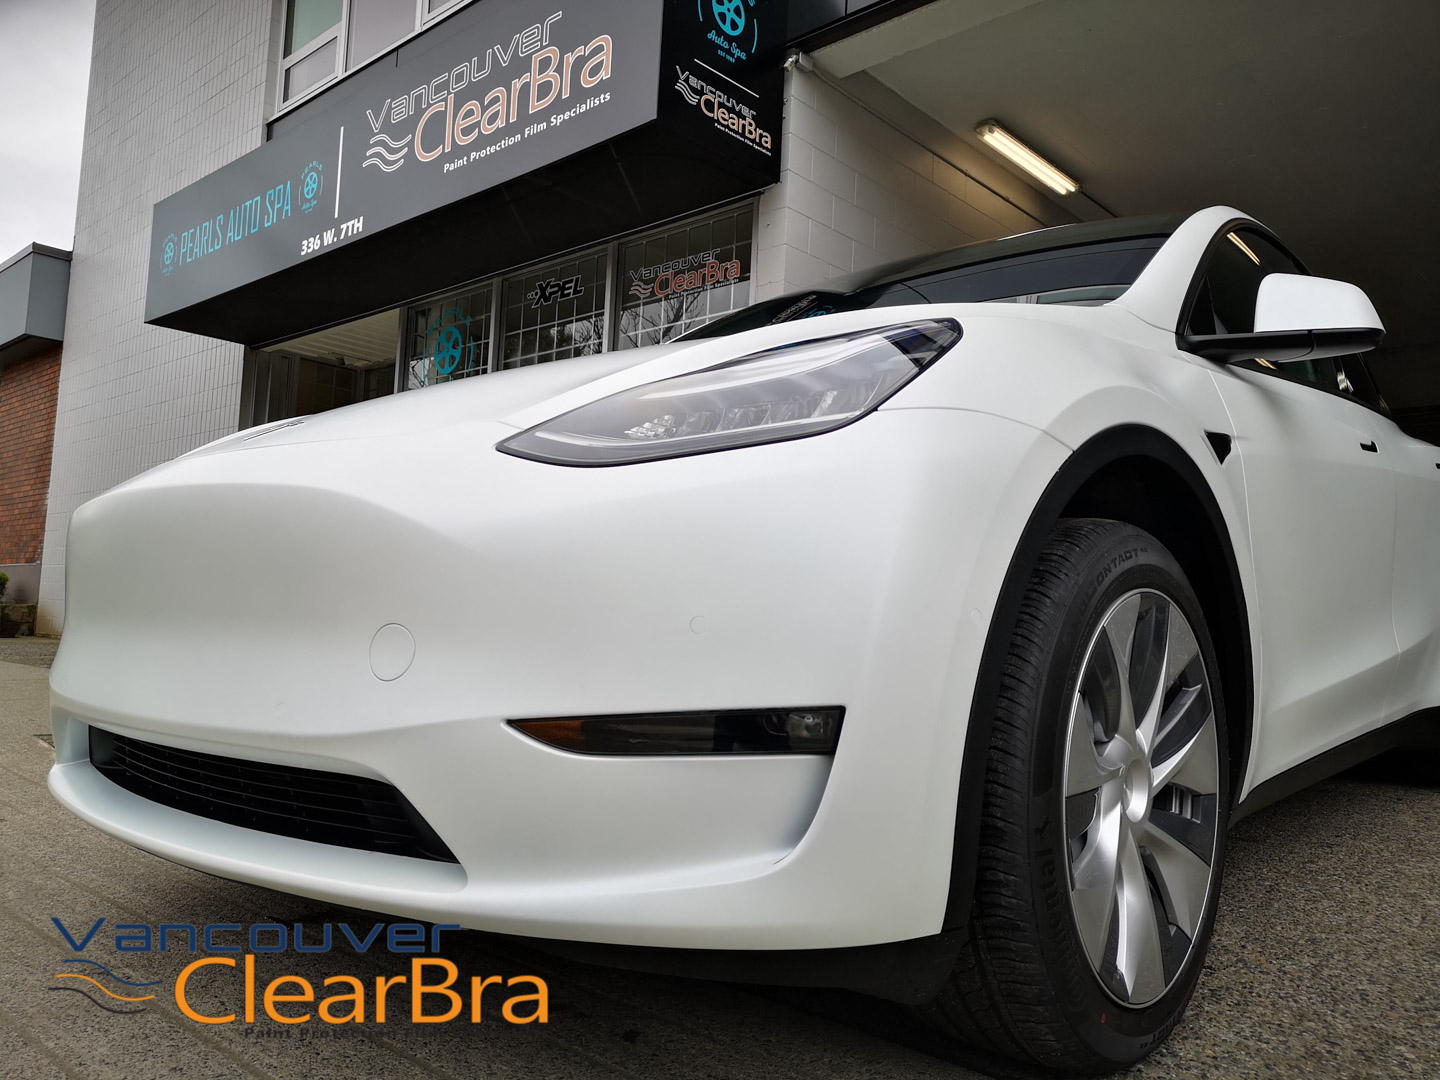 Vancouver ClearBra